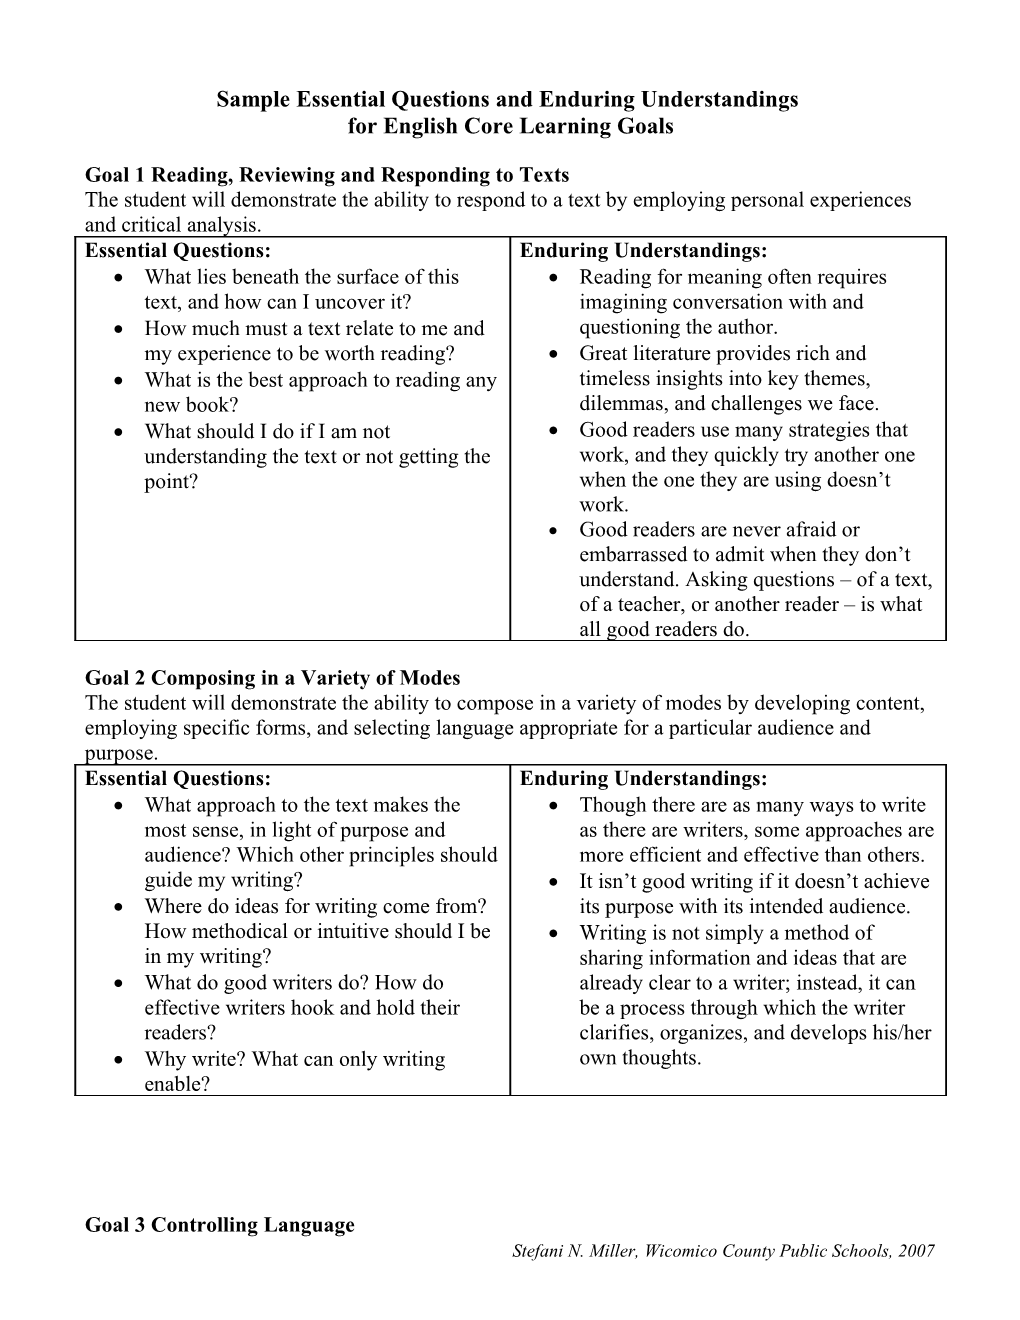 Sample Essential Questions and Enduring Understandings